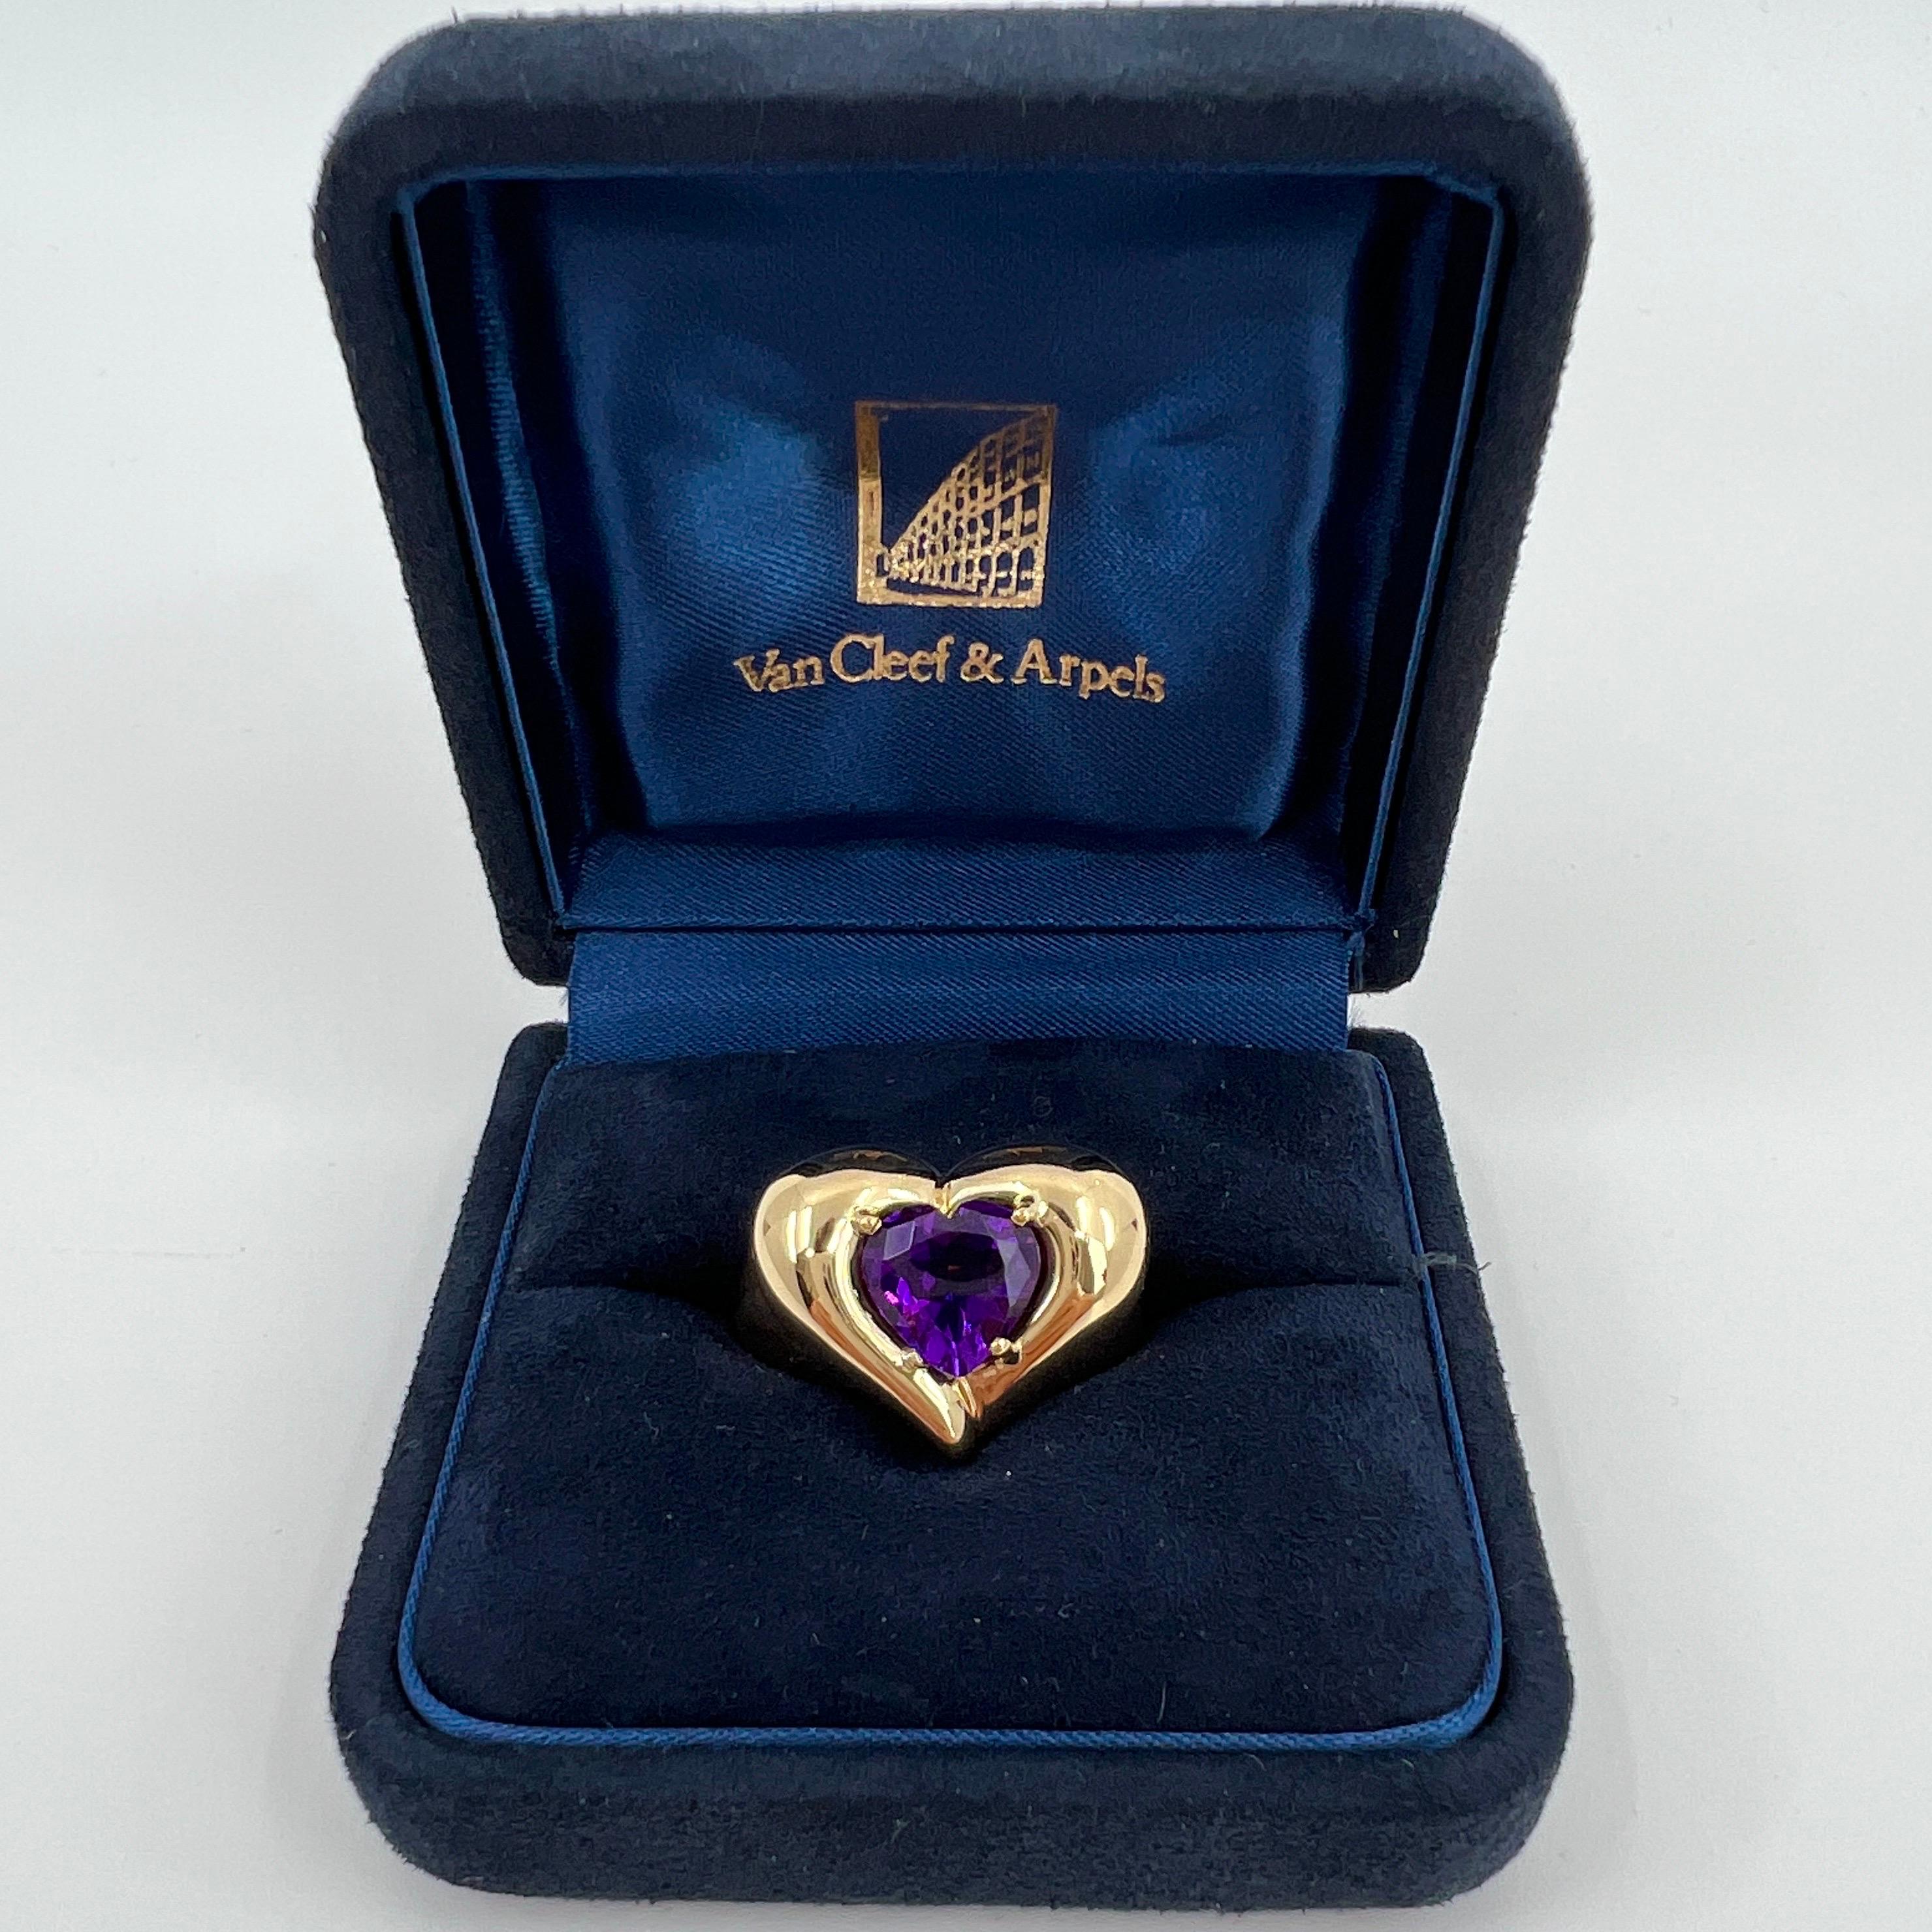 Rare Vintage Van Cleef & Arpels 18k Yellow Gold Amethyst Heart Ring.

A stunning vintage, well made ring with a beautiful heart cut amethyst set in the centre. Fine jewellery houses like Van Cleef & Arpels only use the finest natural gemstones in